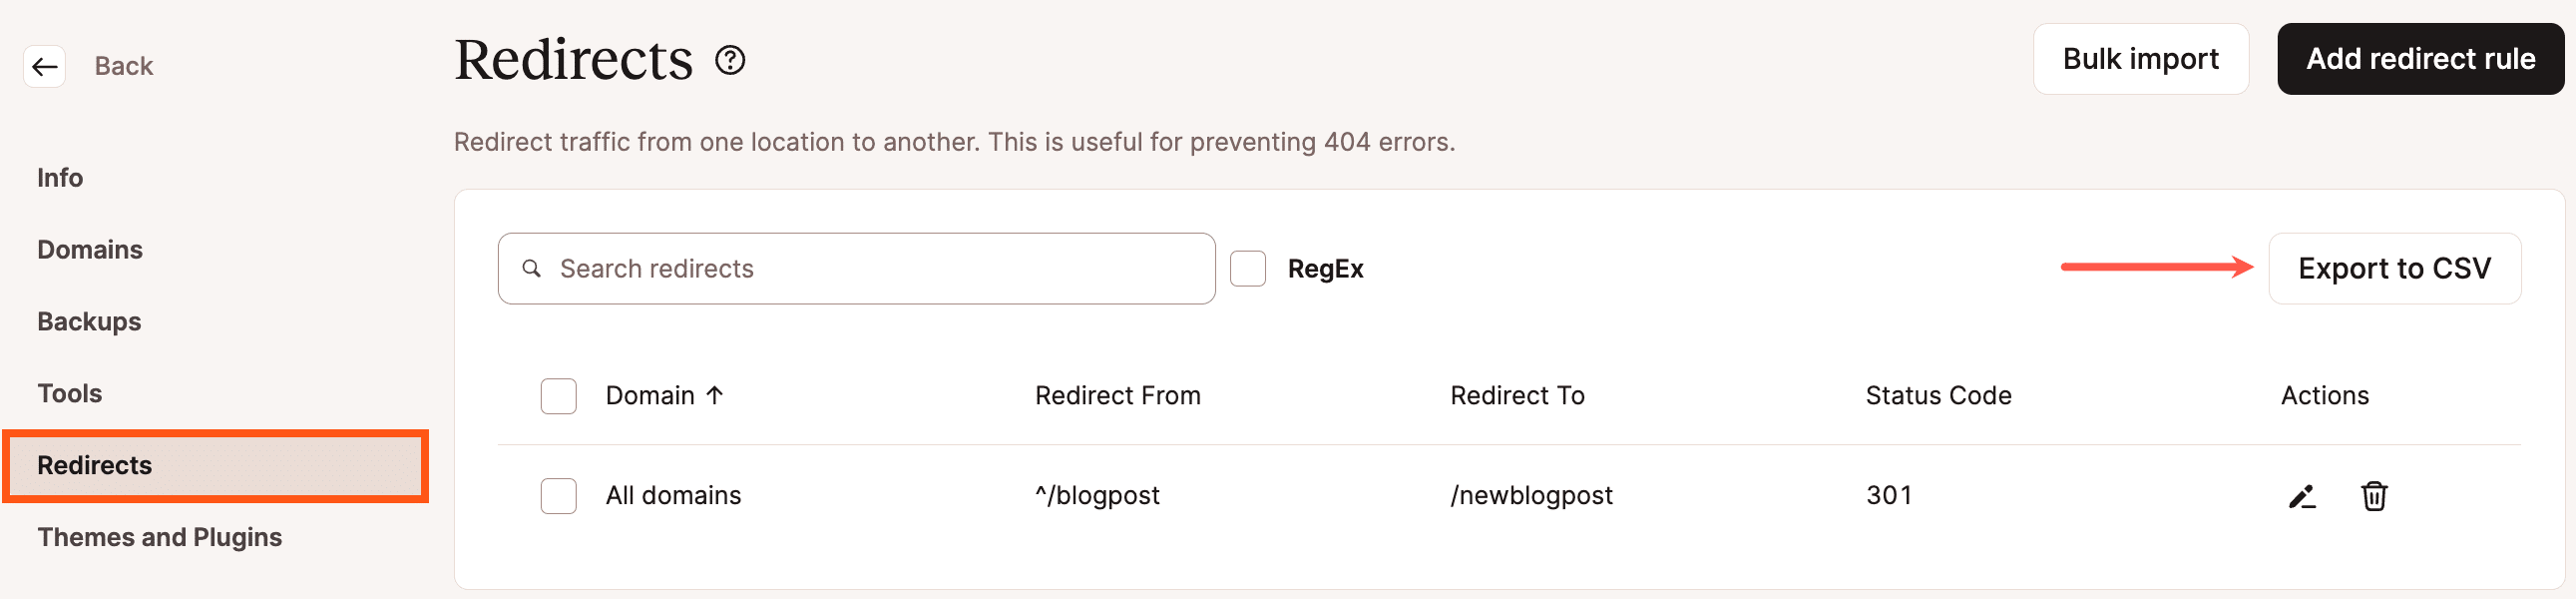 Export redirects to CSV from MyKinsta.